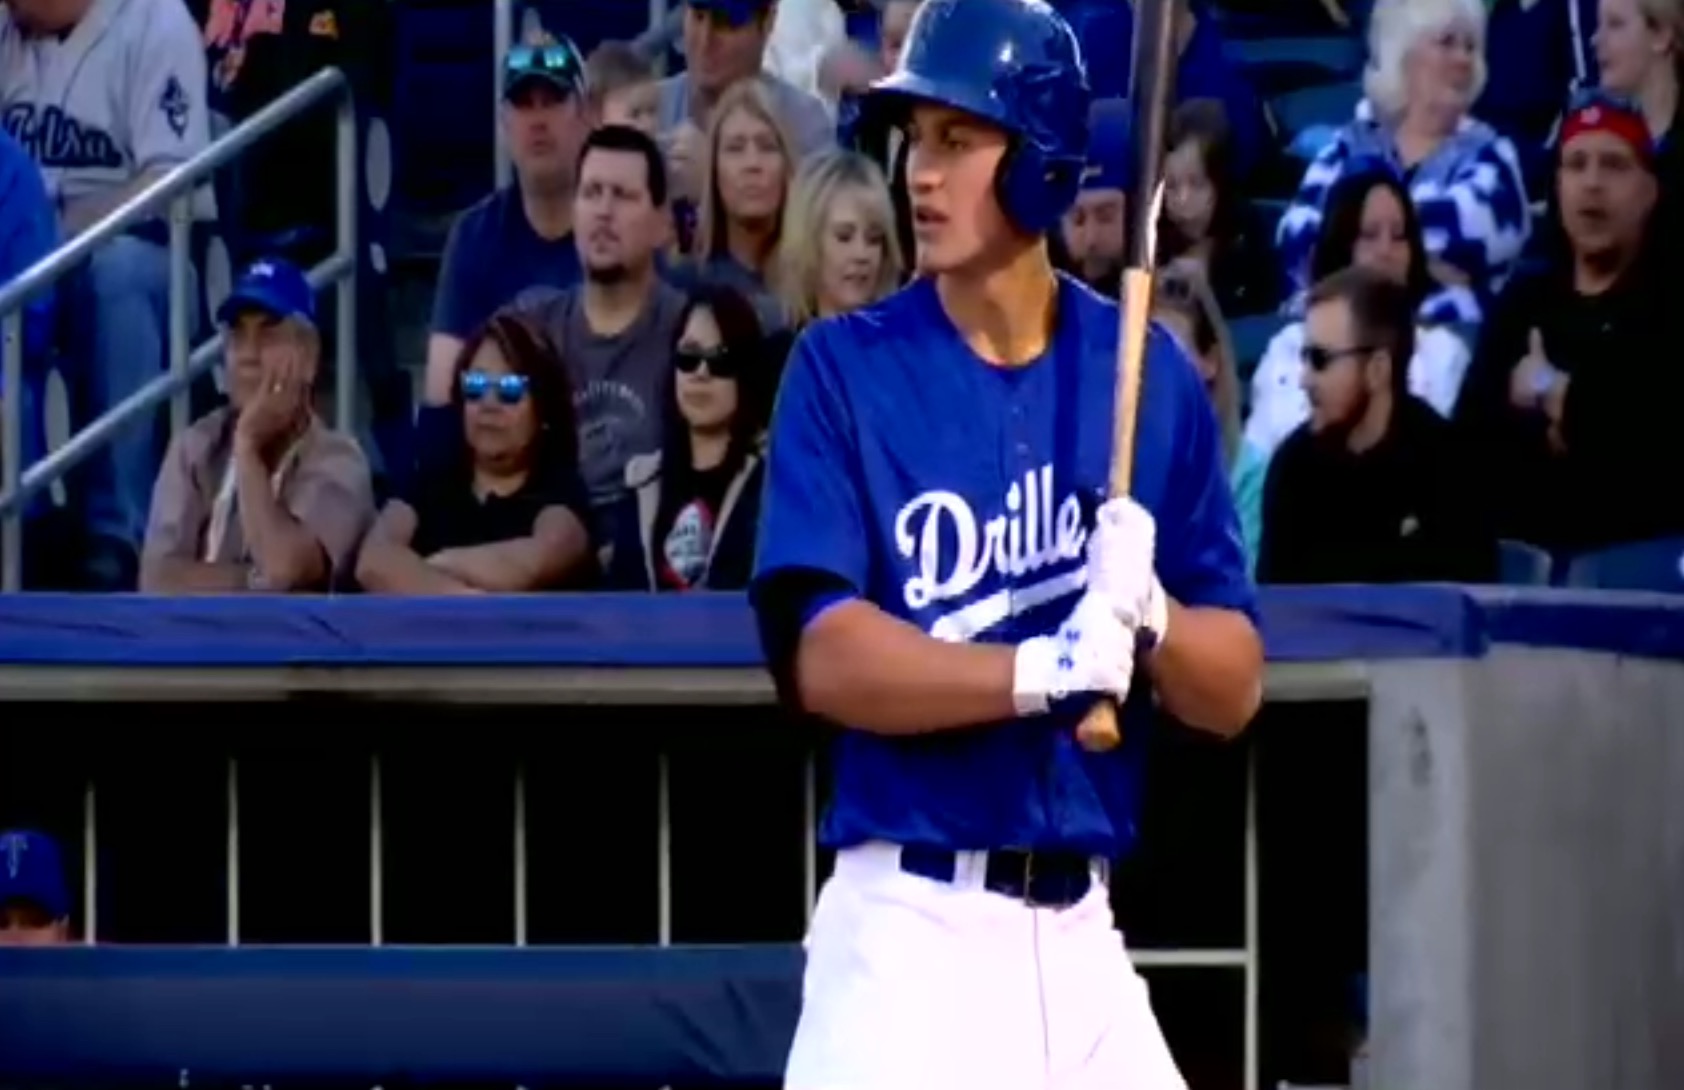 Corey Seager was 2-for-4 with a double and three RBI in his Tulsa debut.